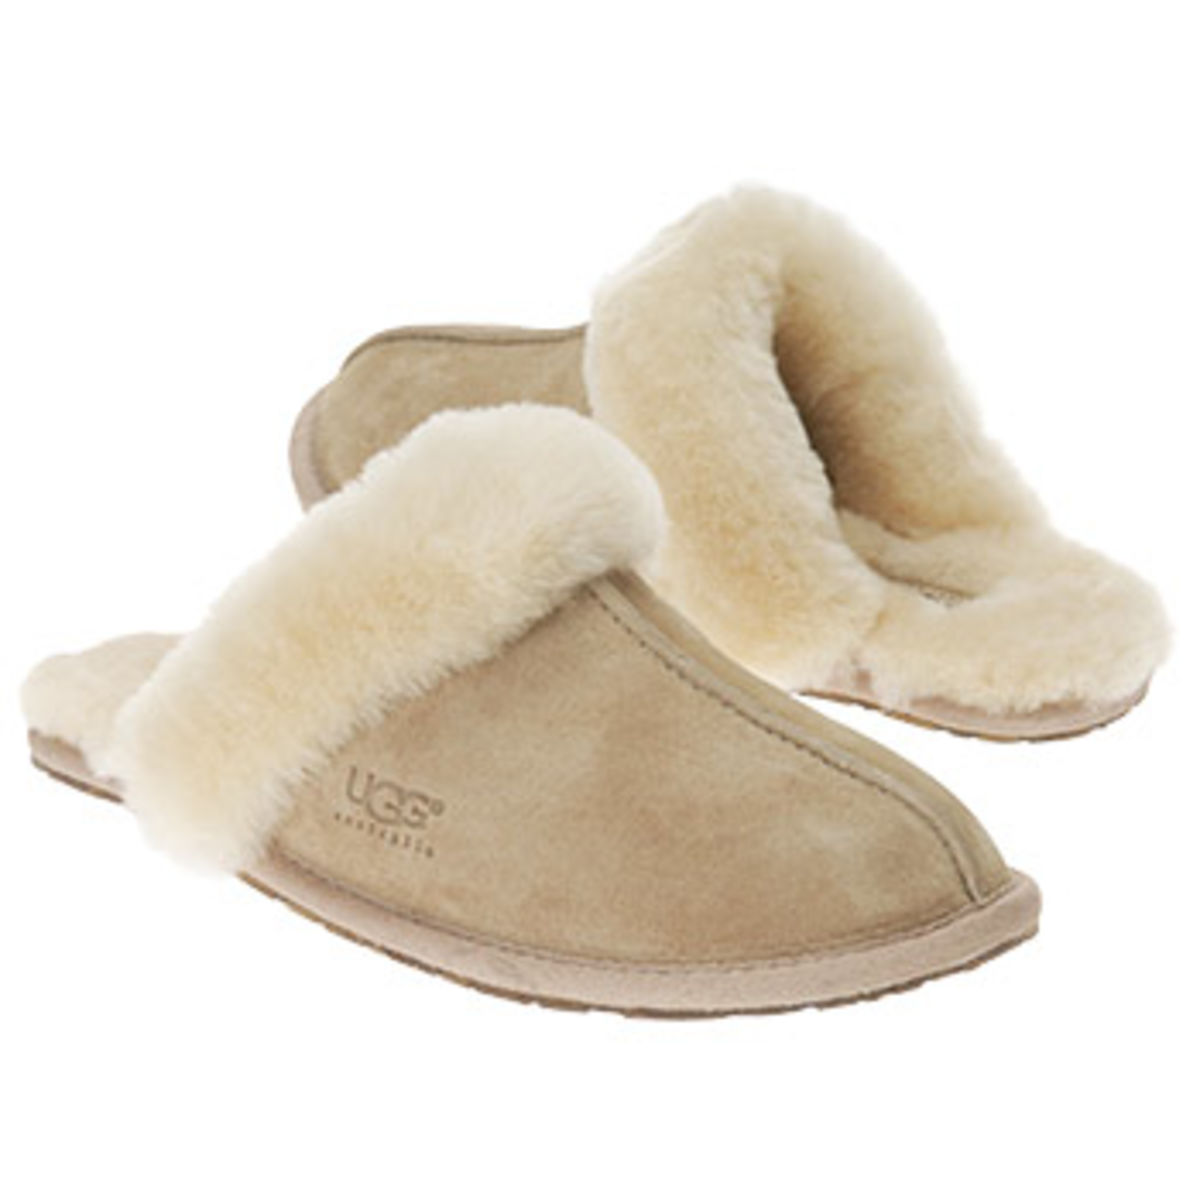 Best Inexpensive Genuine UGG Slippers For Women On Sale - Reviews And Ratings on Flipboard by ...